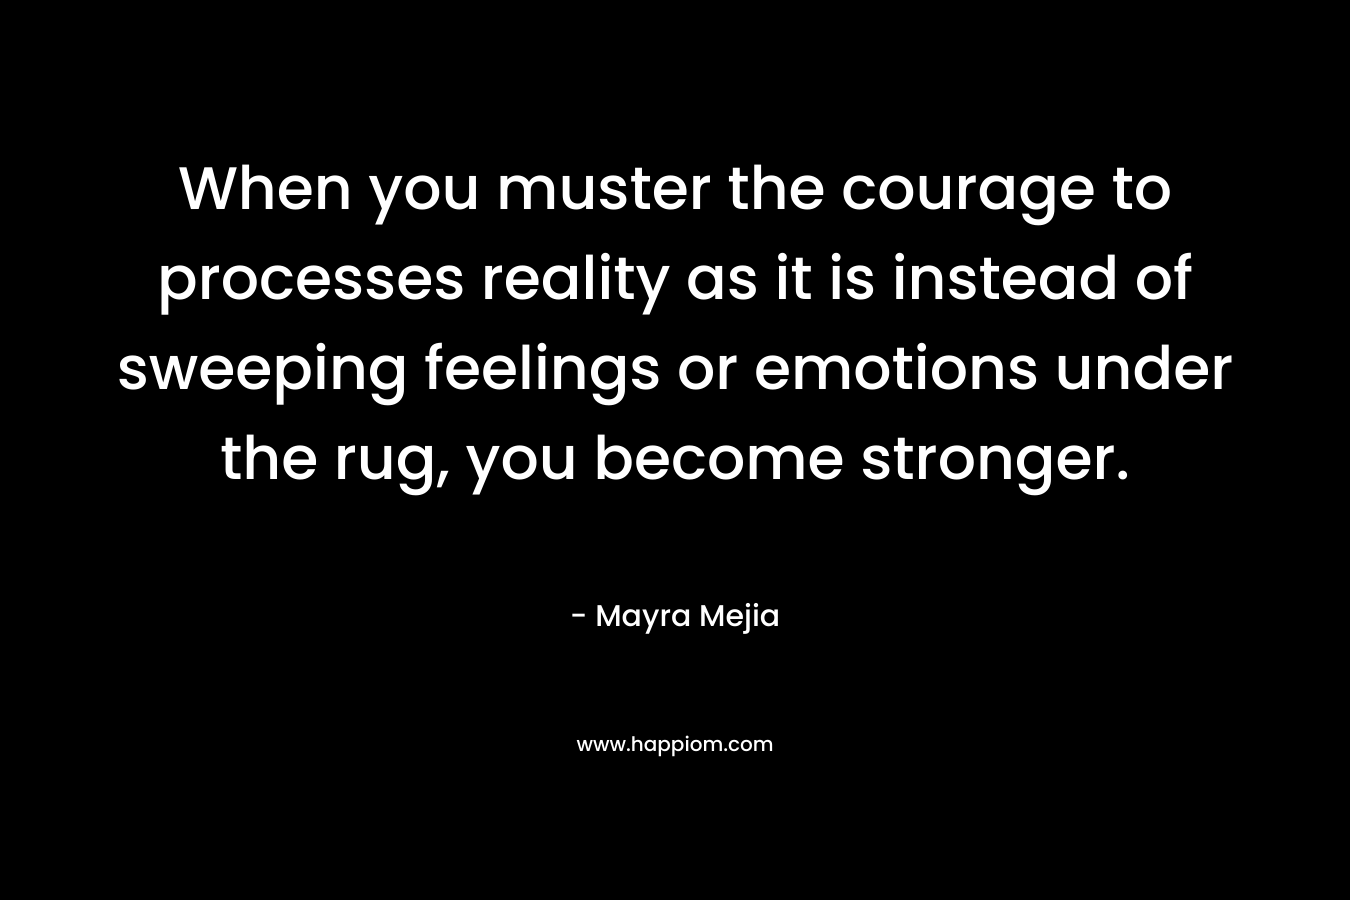 When you muster the courage to processes reality as it is instead of sweeping feelings or emotions under the rug, you become stronger.